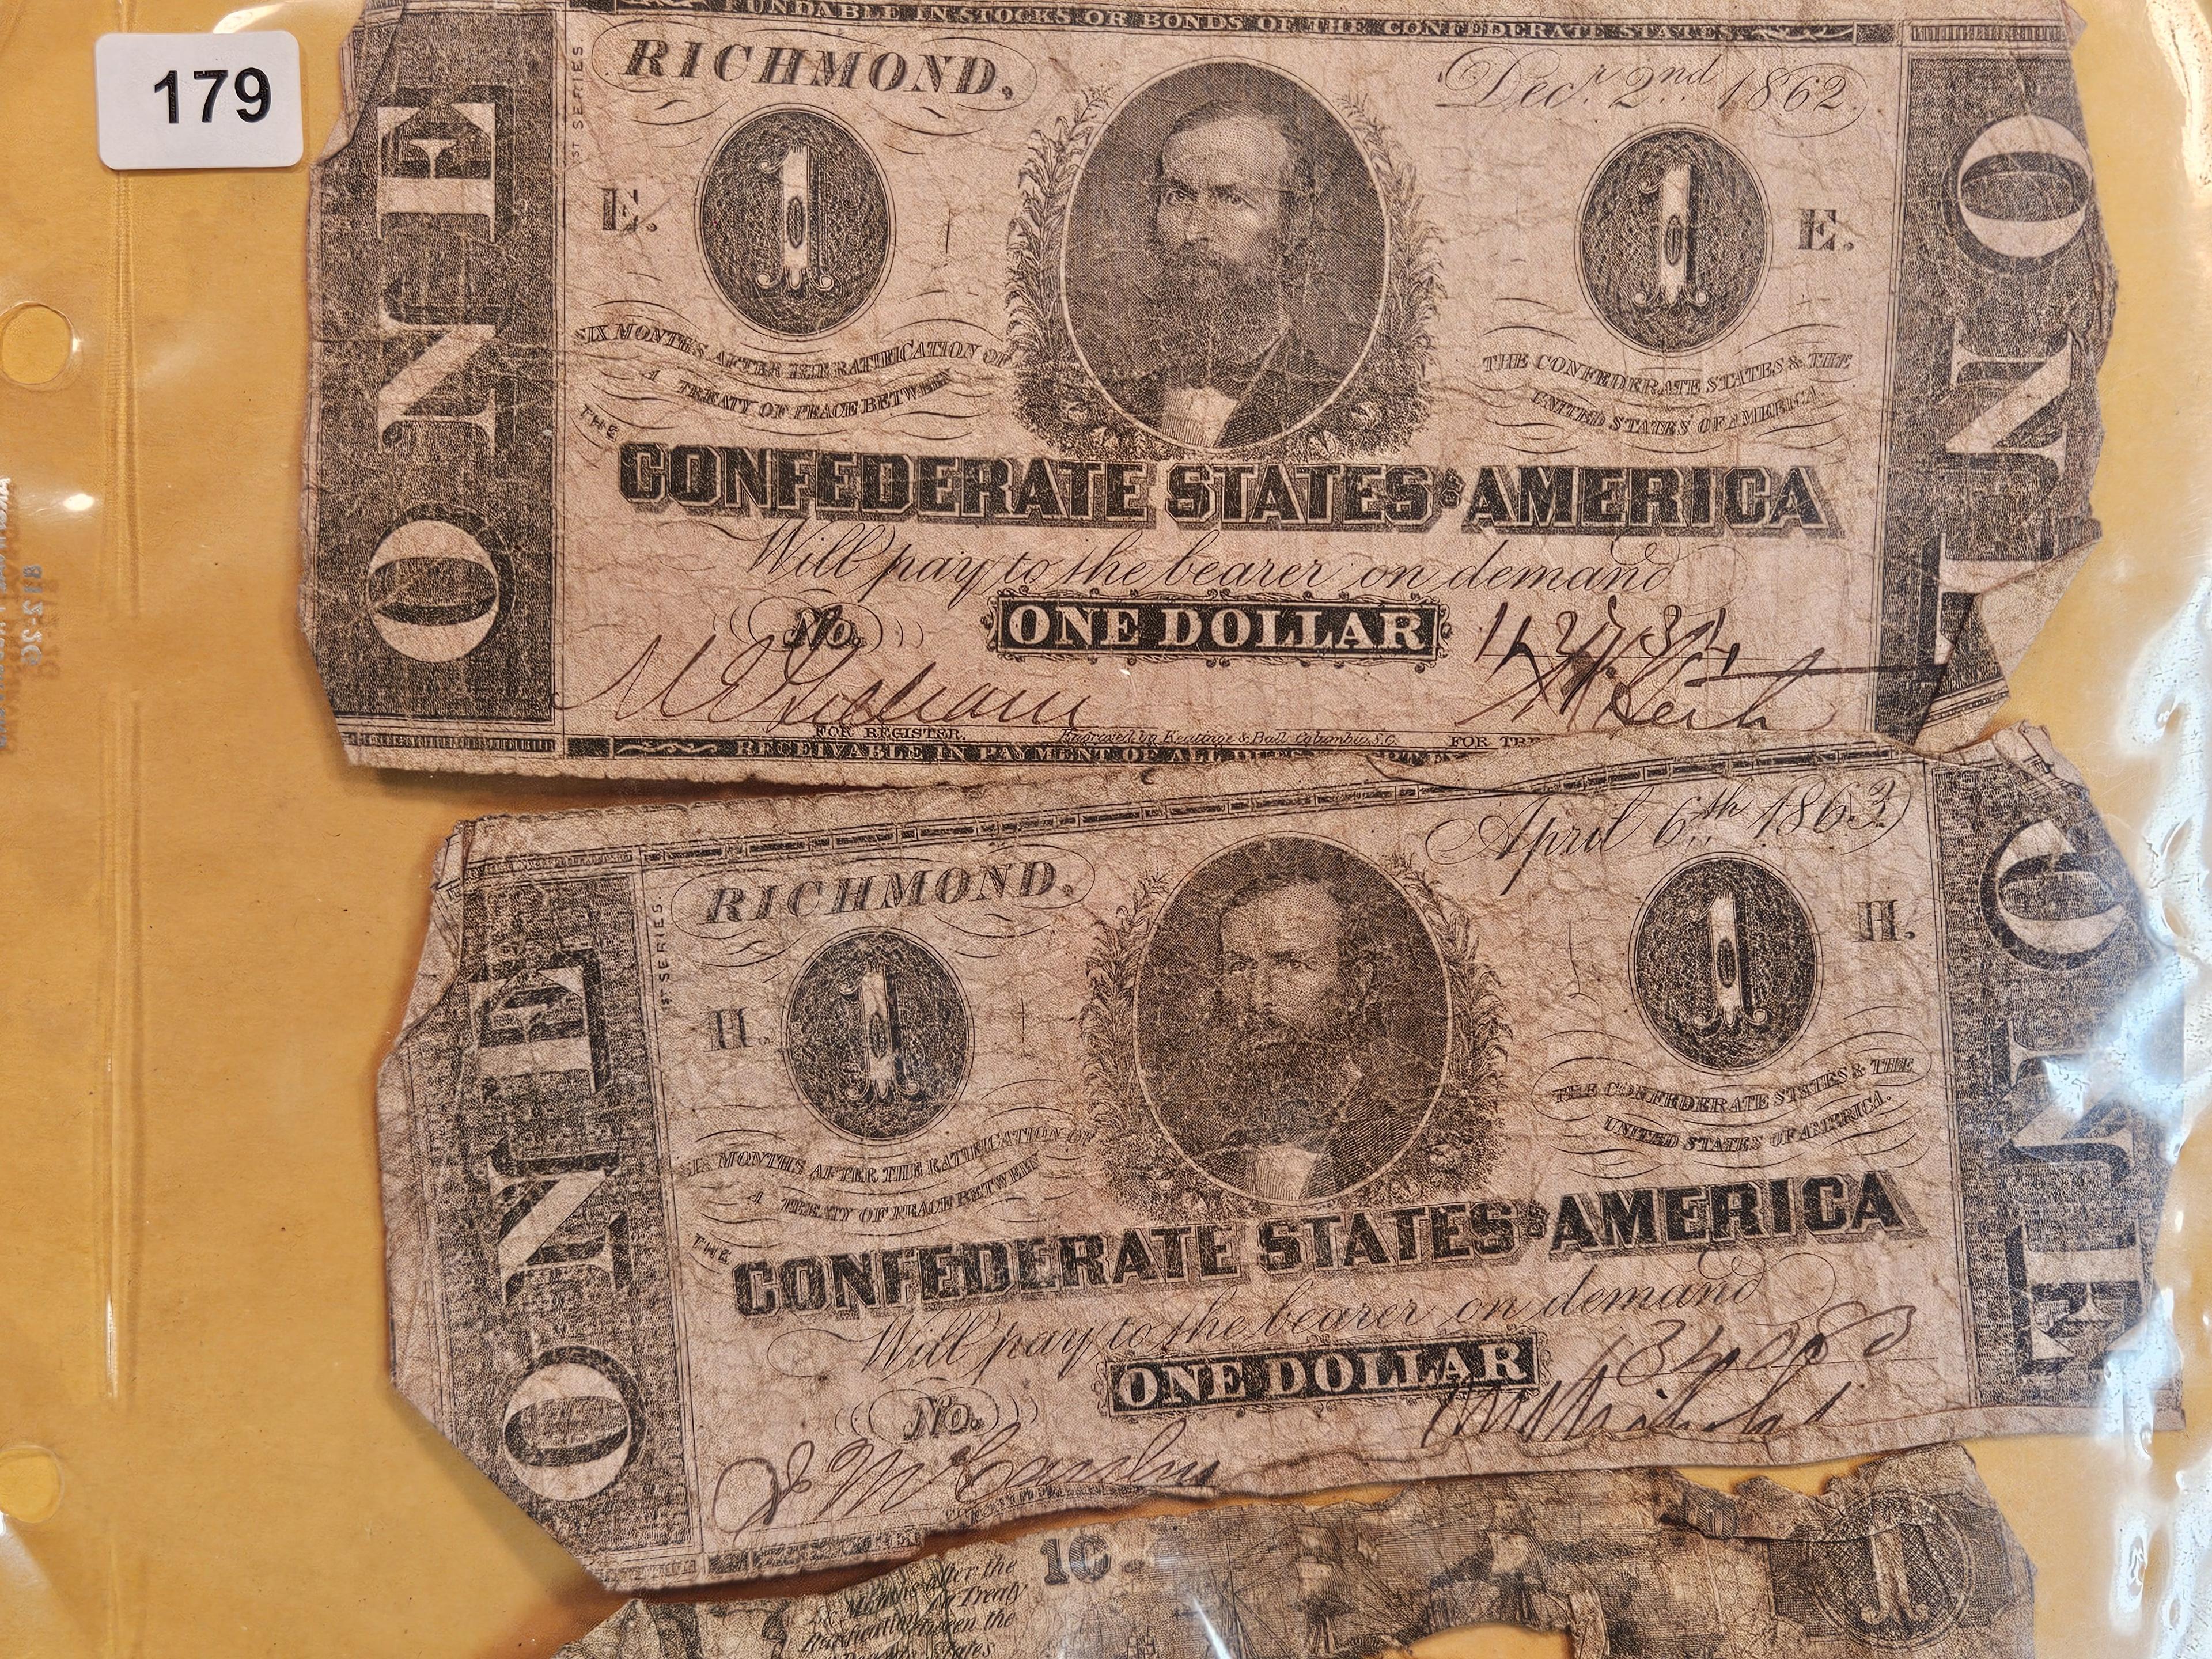 Four old pieces of Confederate currency